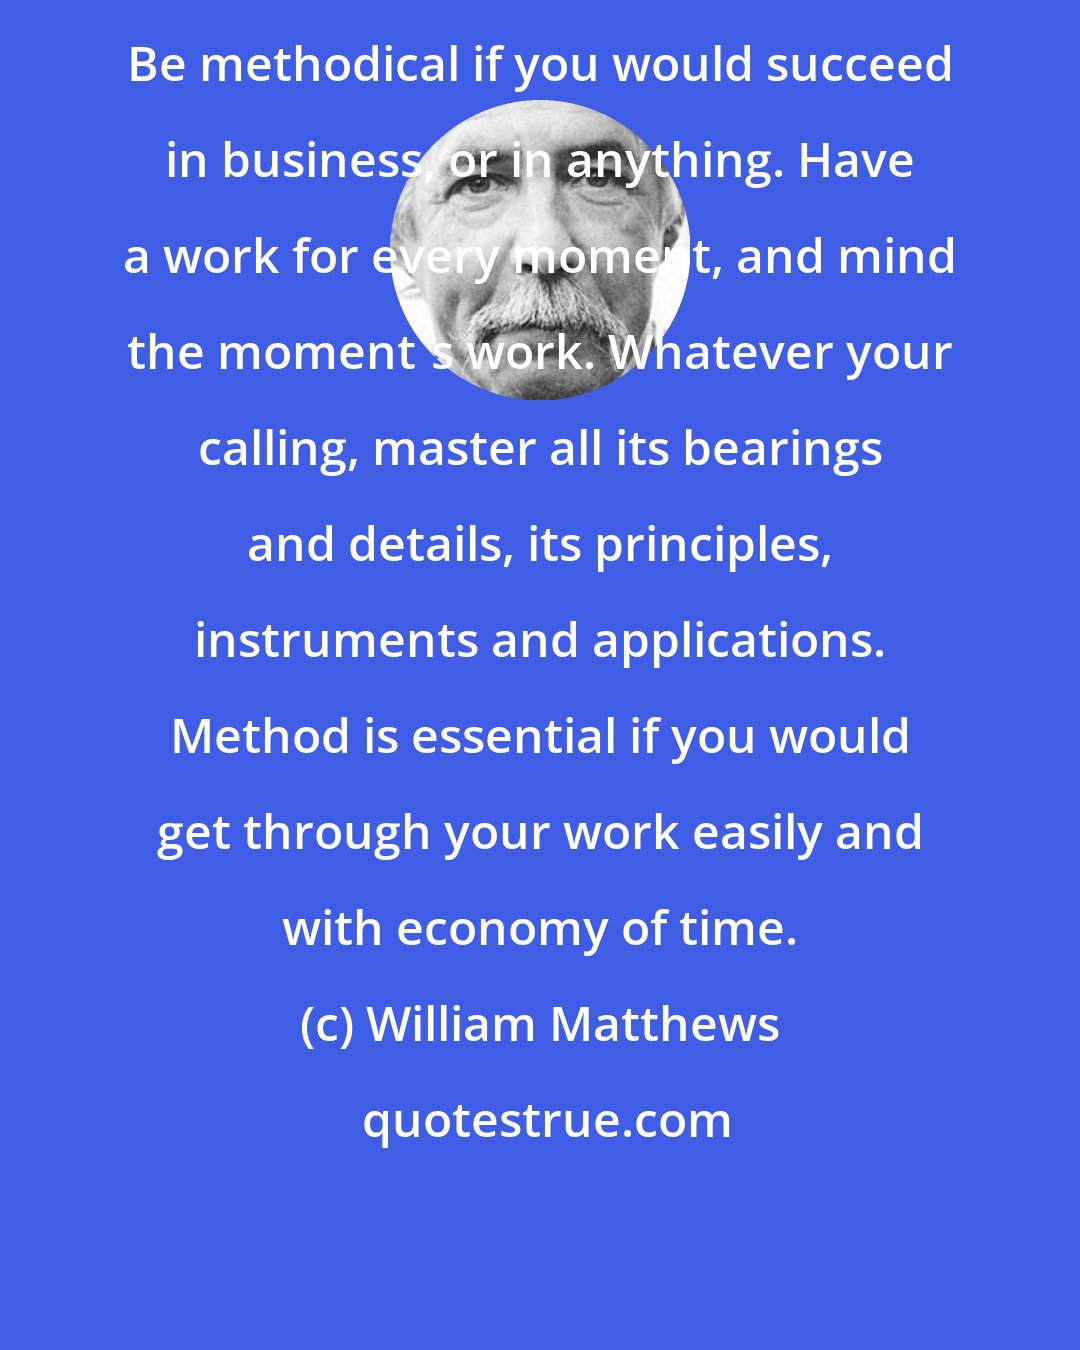 William Matthews: Be methodical if you would succeed in business, or in anything. Have a work for every moment, and mind the moment's work. Whatever your calling, master all its bearings and details, its principles, instruments and applications. Method is essential if you would get through your work easily and with economy of time.